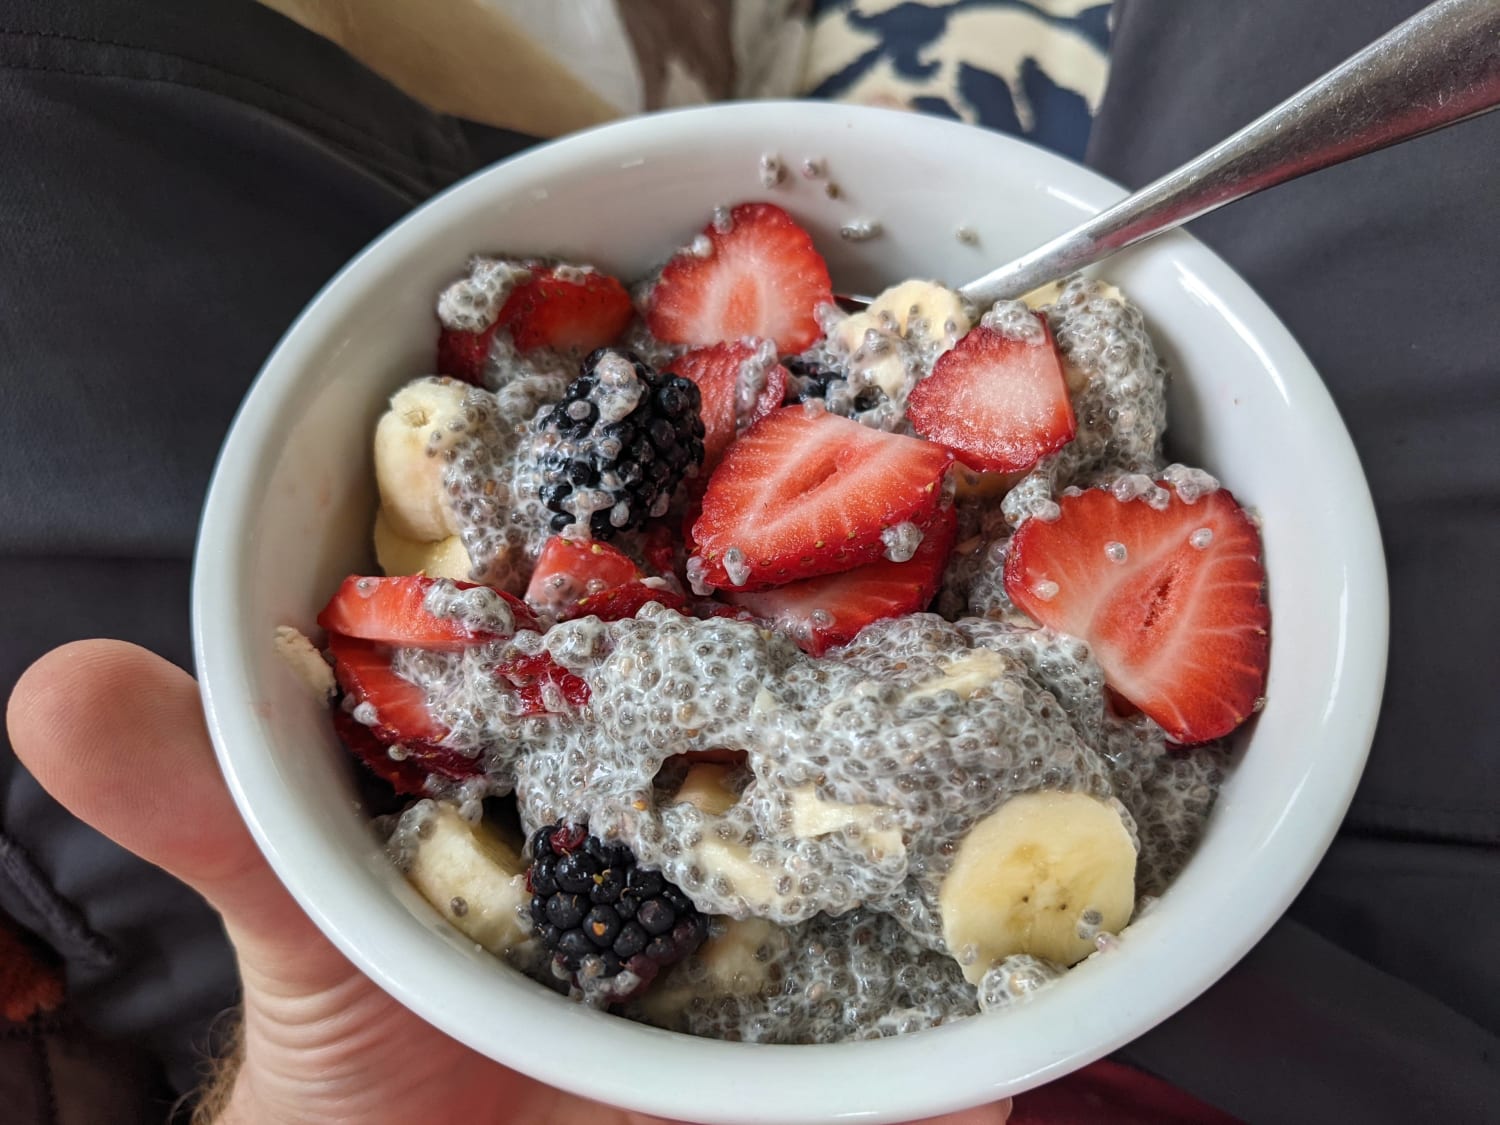 Been alternating between this and oatmeal in the mornings... either way it's got lots of fruit and fills you up! Bonus points for flax seed meal on top